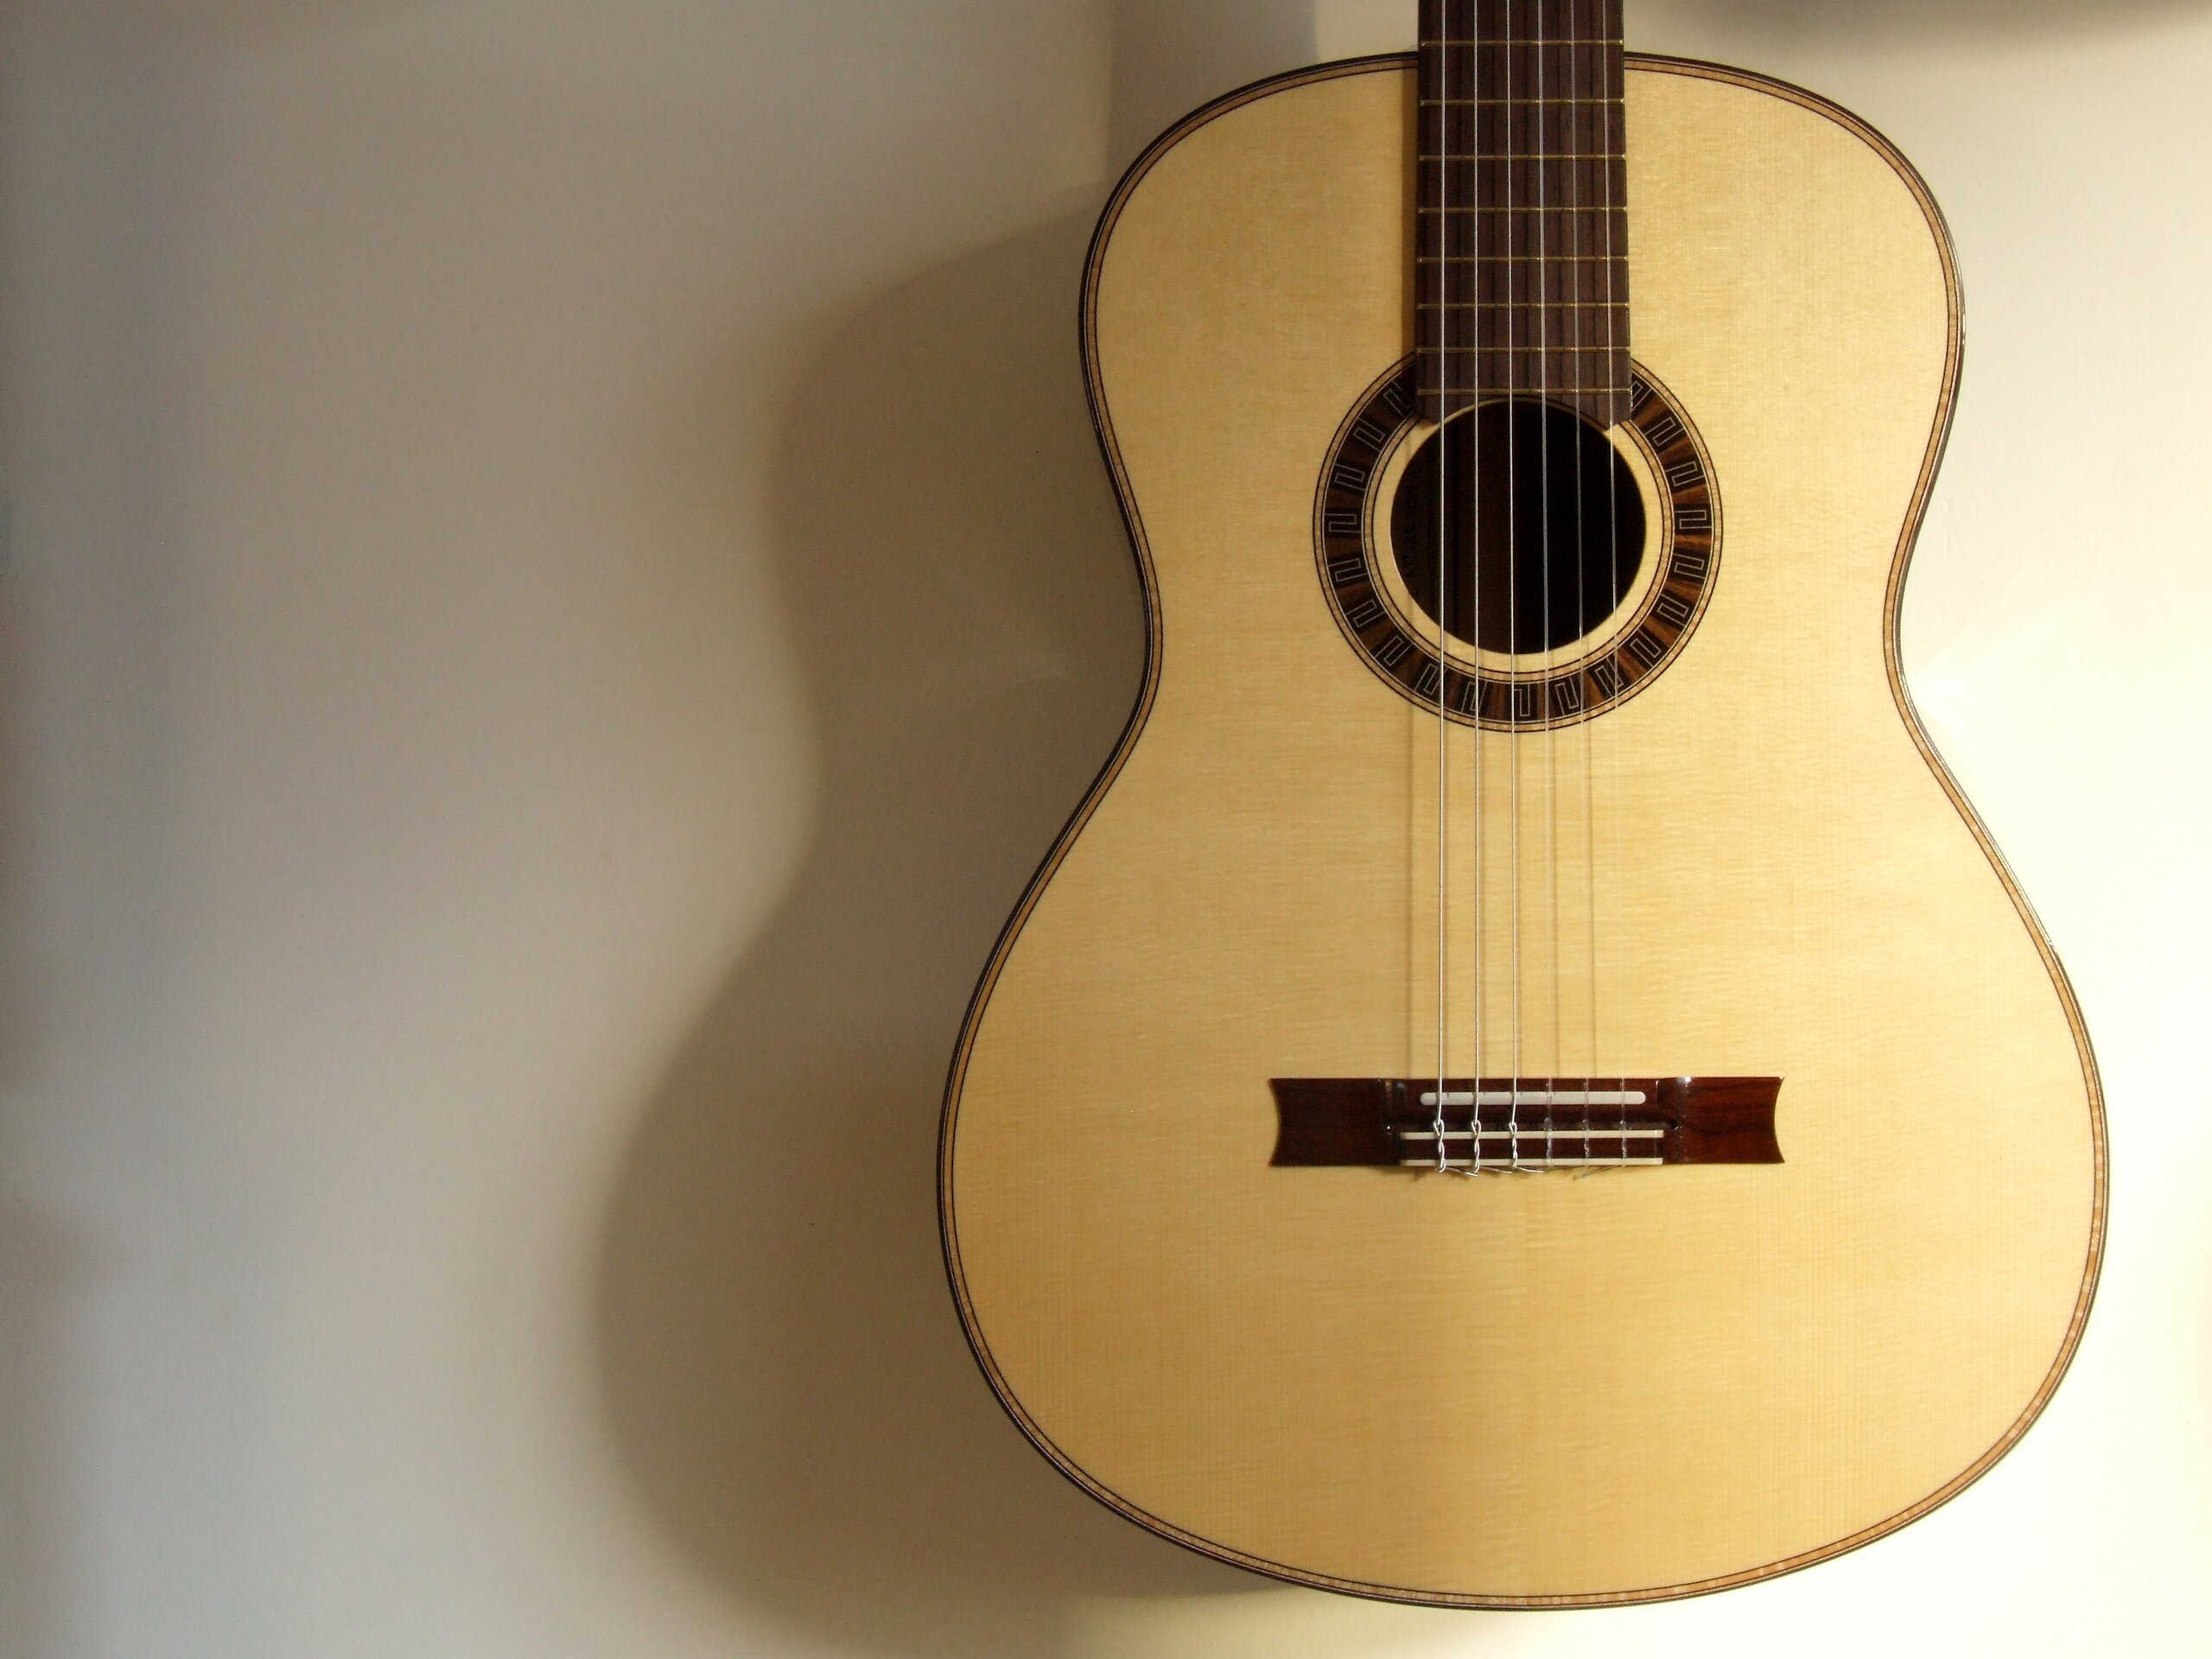 Custom guitars. Spruce topped classical guitar with meander rosette